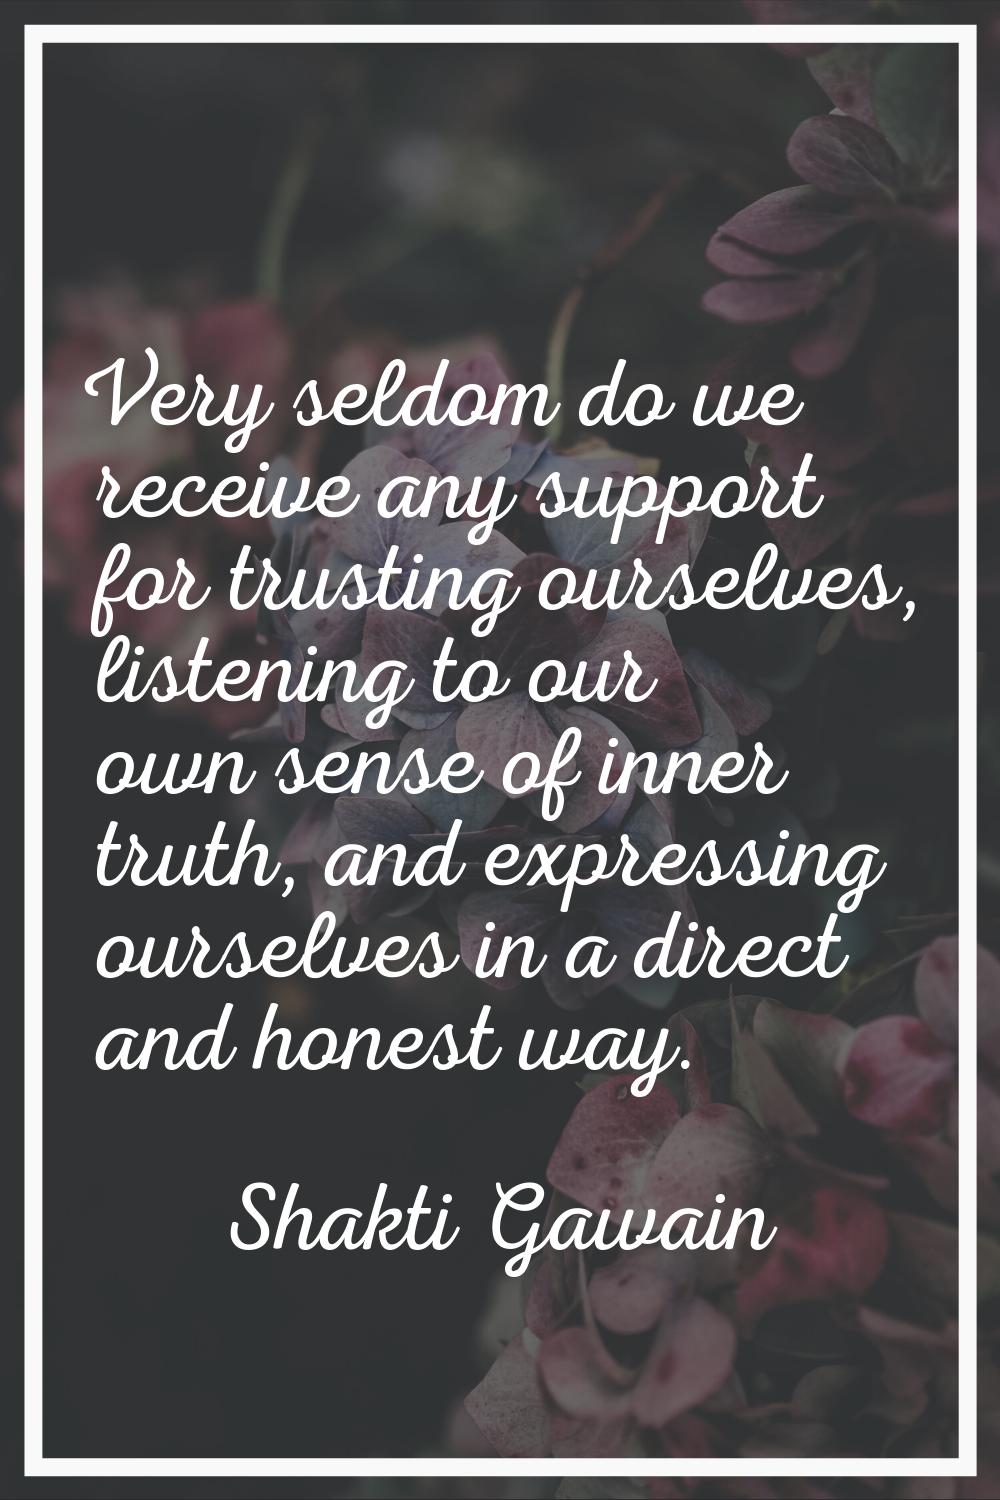 Very seldom do we receive any support for trusting ourselves, listening to our own sense of inner t